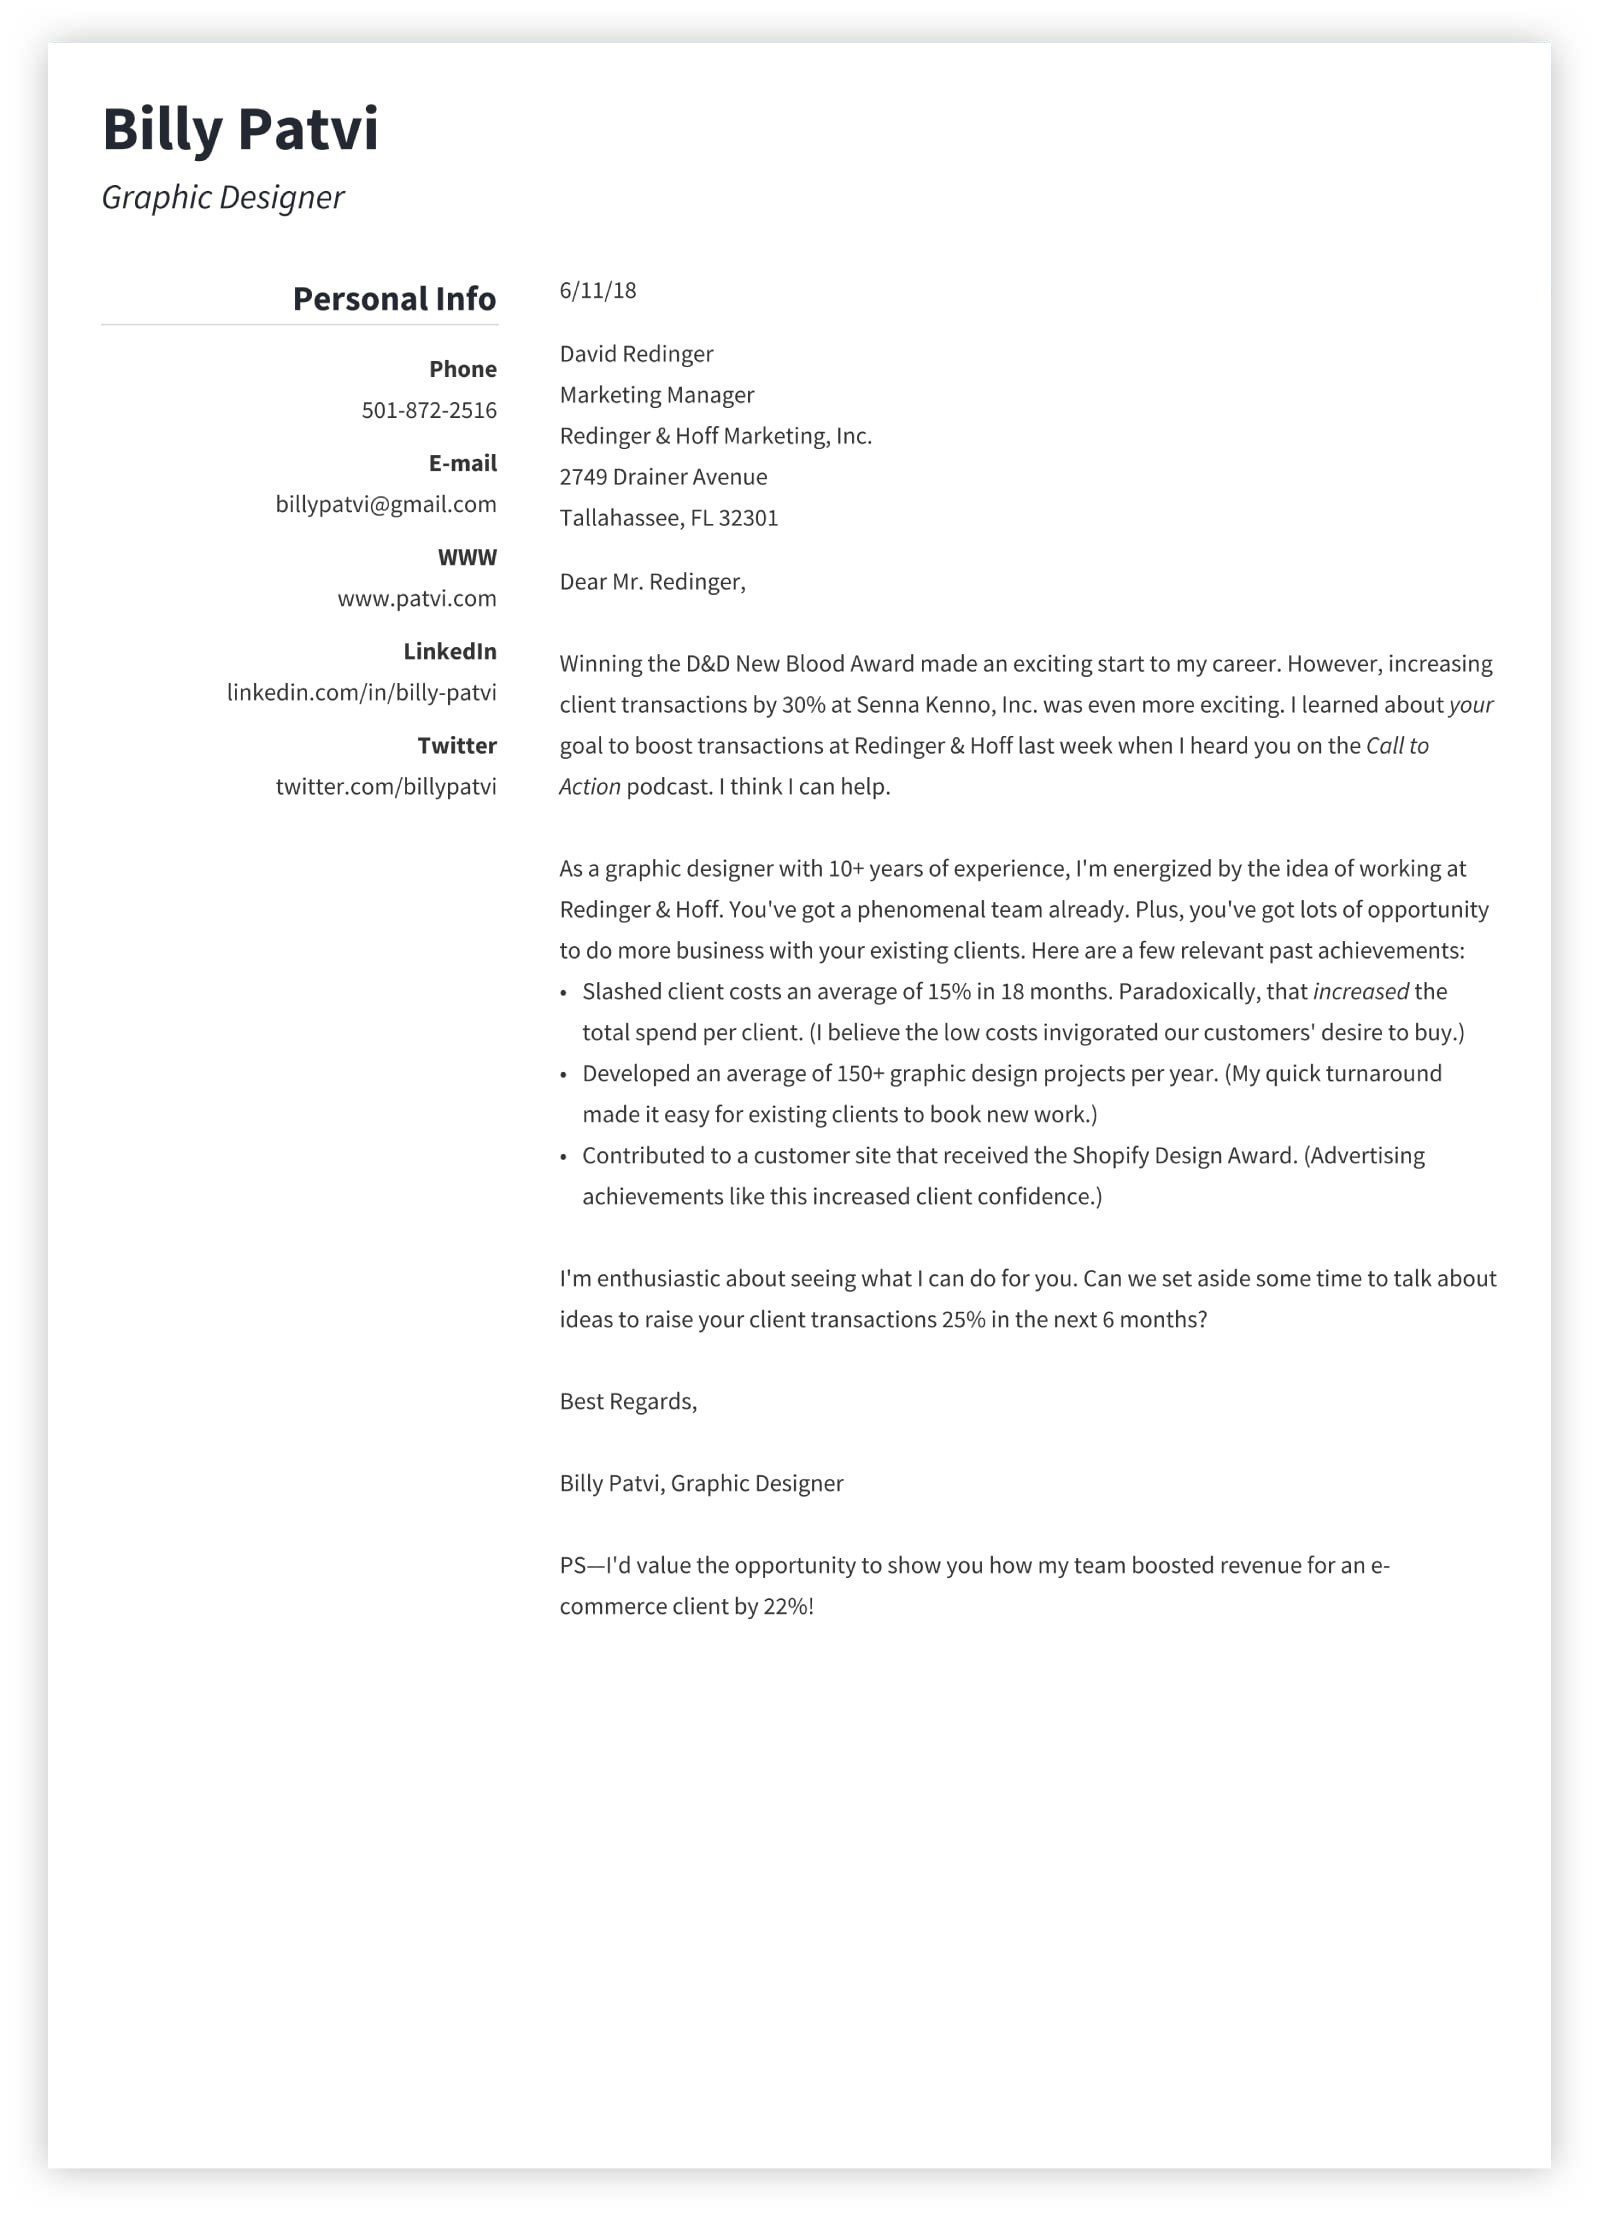 How to Write a Cover Letter: 10+ Examples, Tips ...